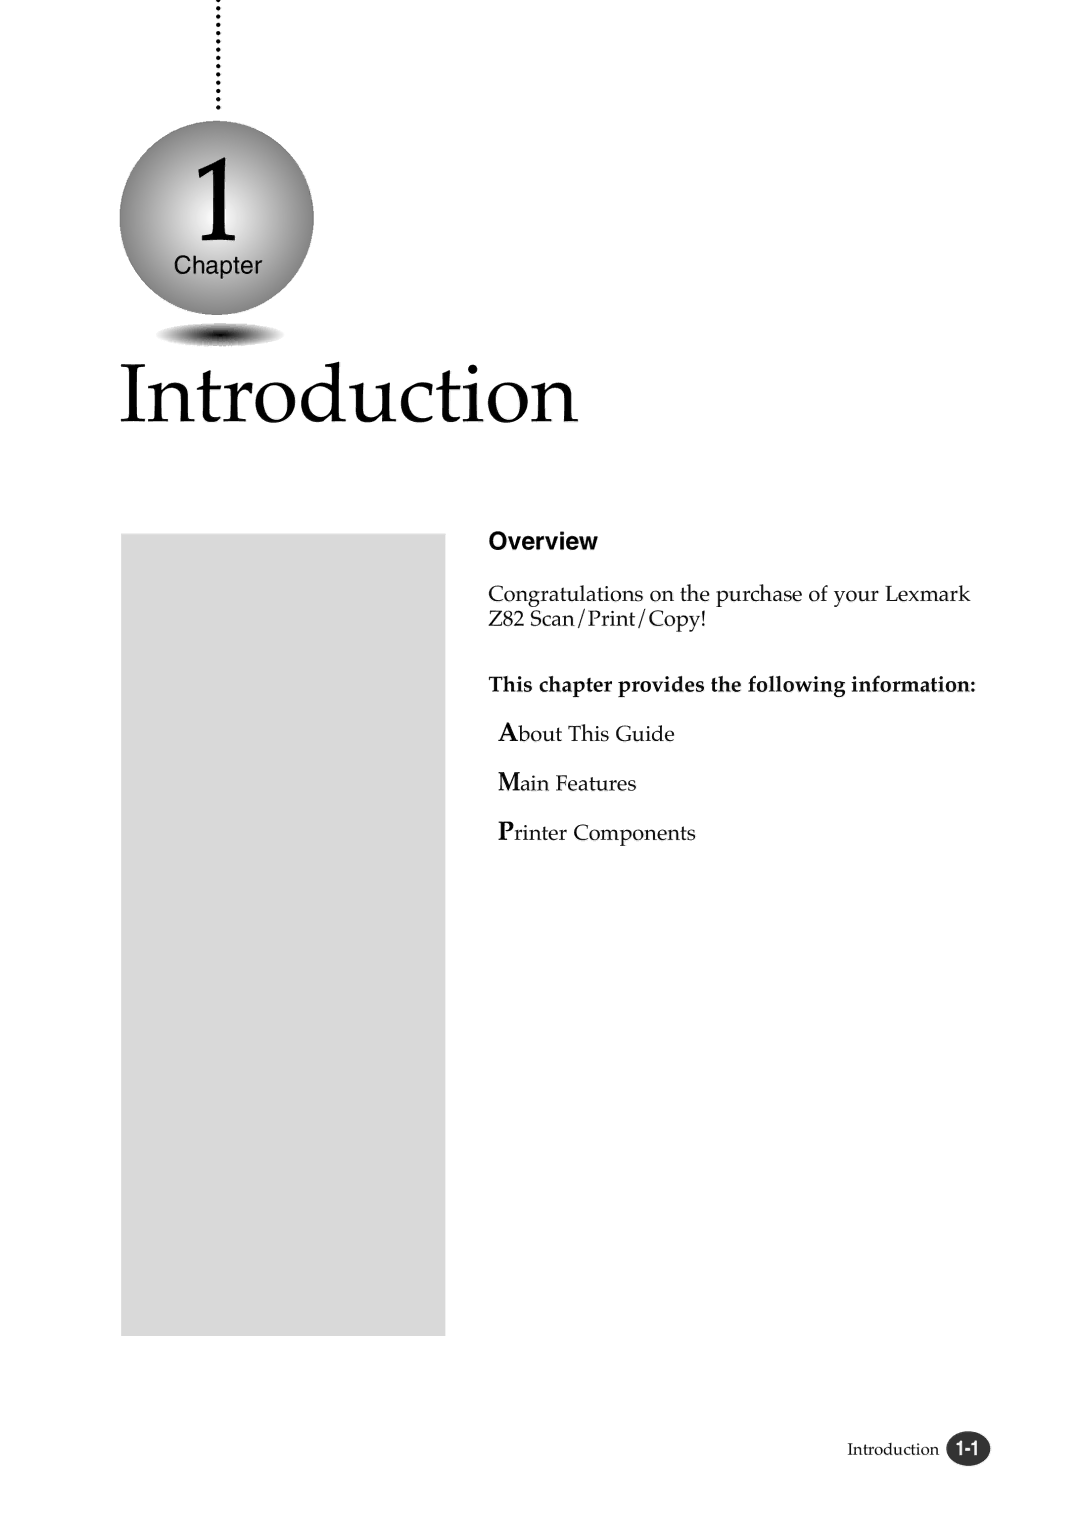 Lexmark Z82 manual Introduction, Overview 